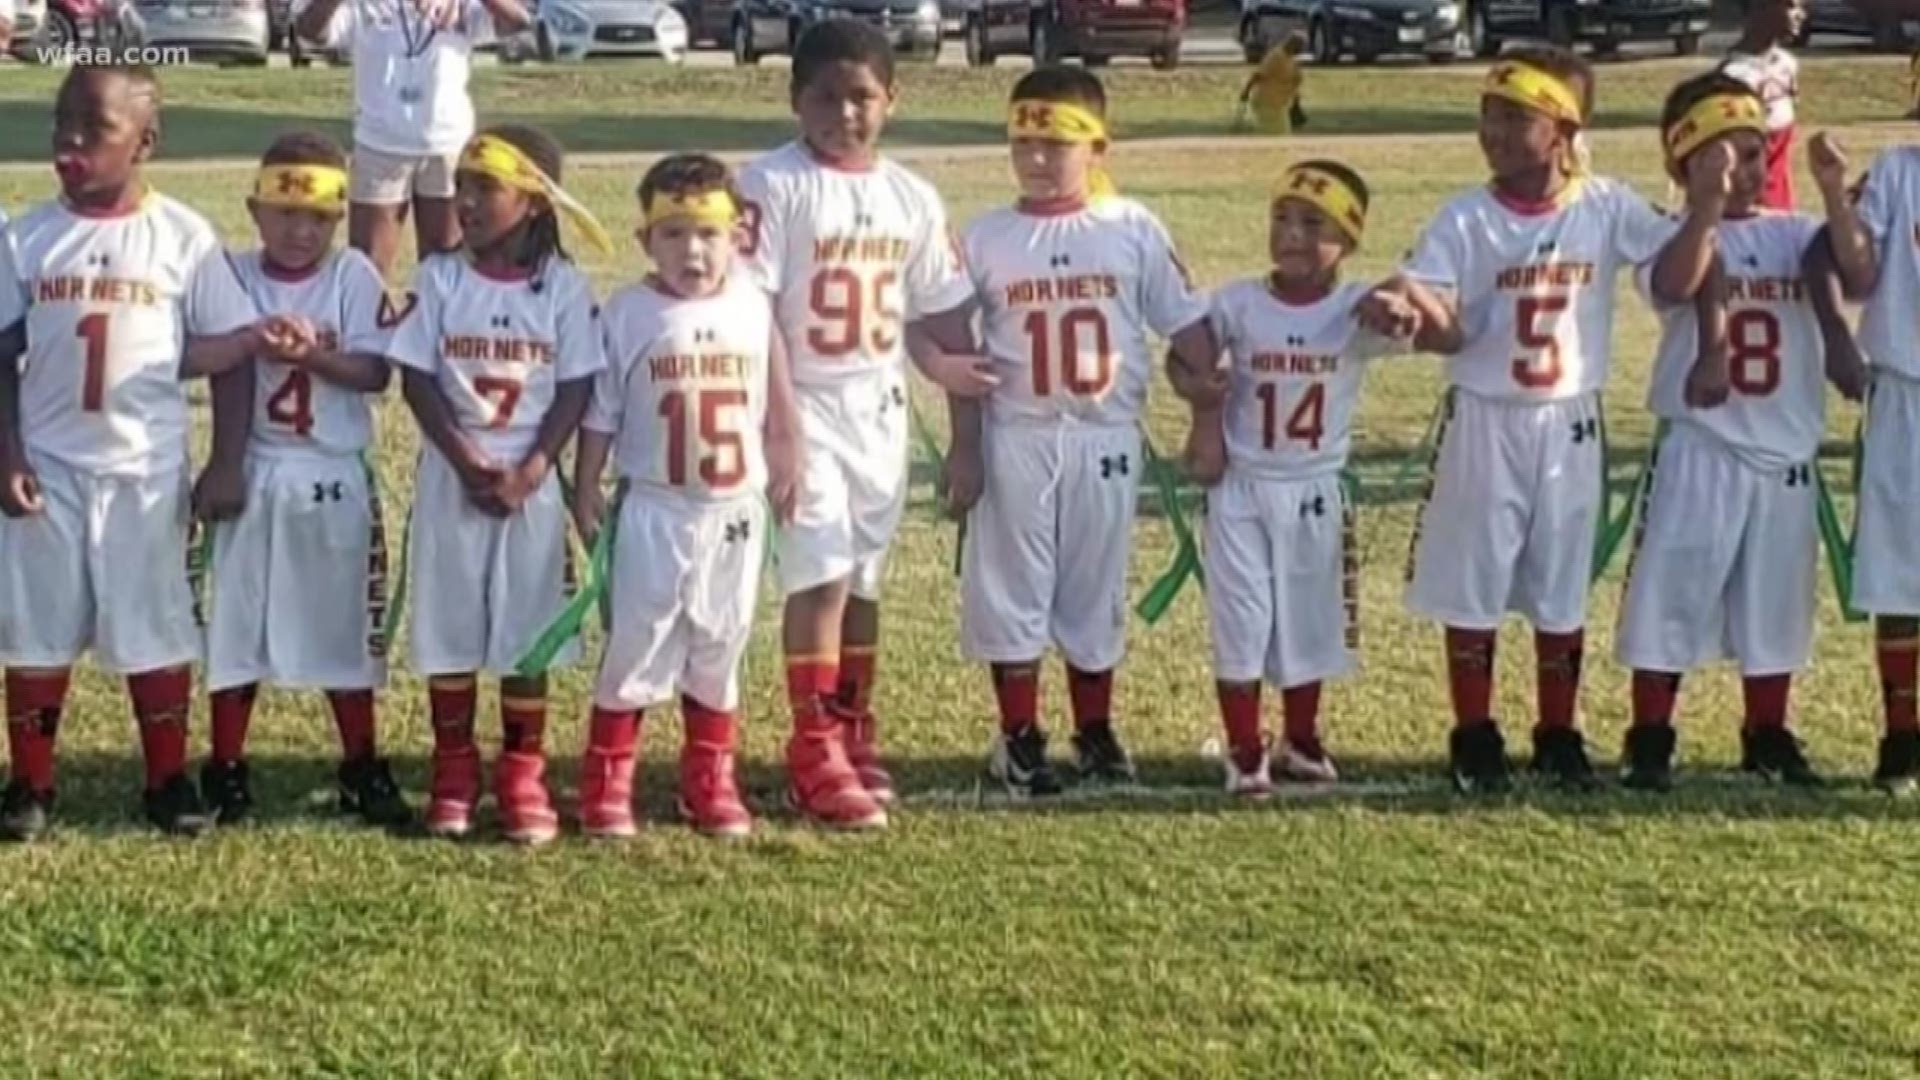 The Mesquite Hornets Pee-Wee Football Program is trying to figure out a path forward after much of their equipment was stolen last week.